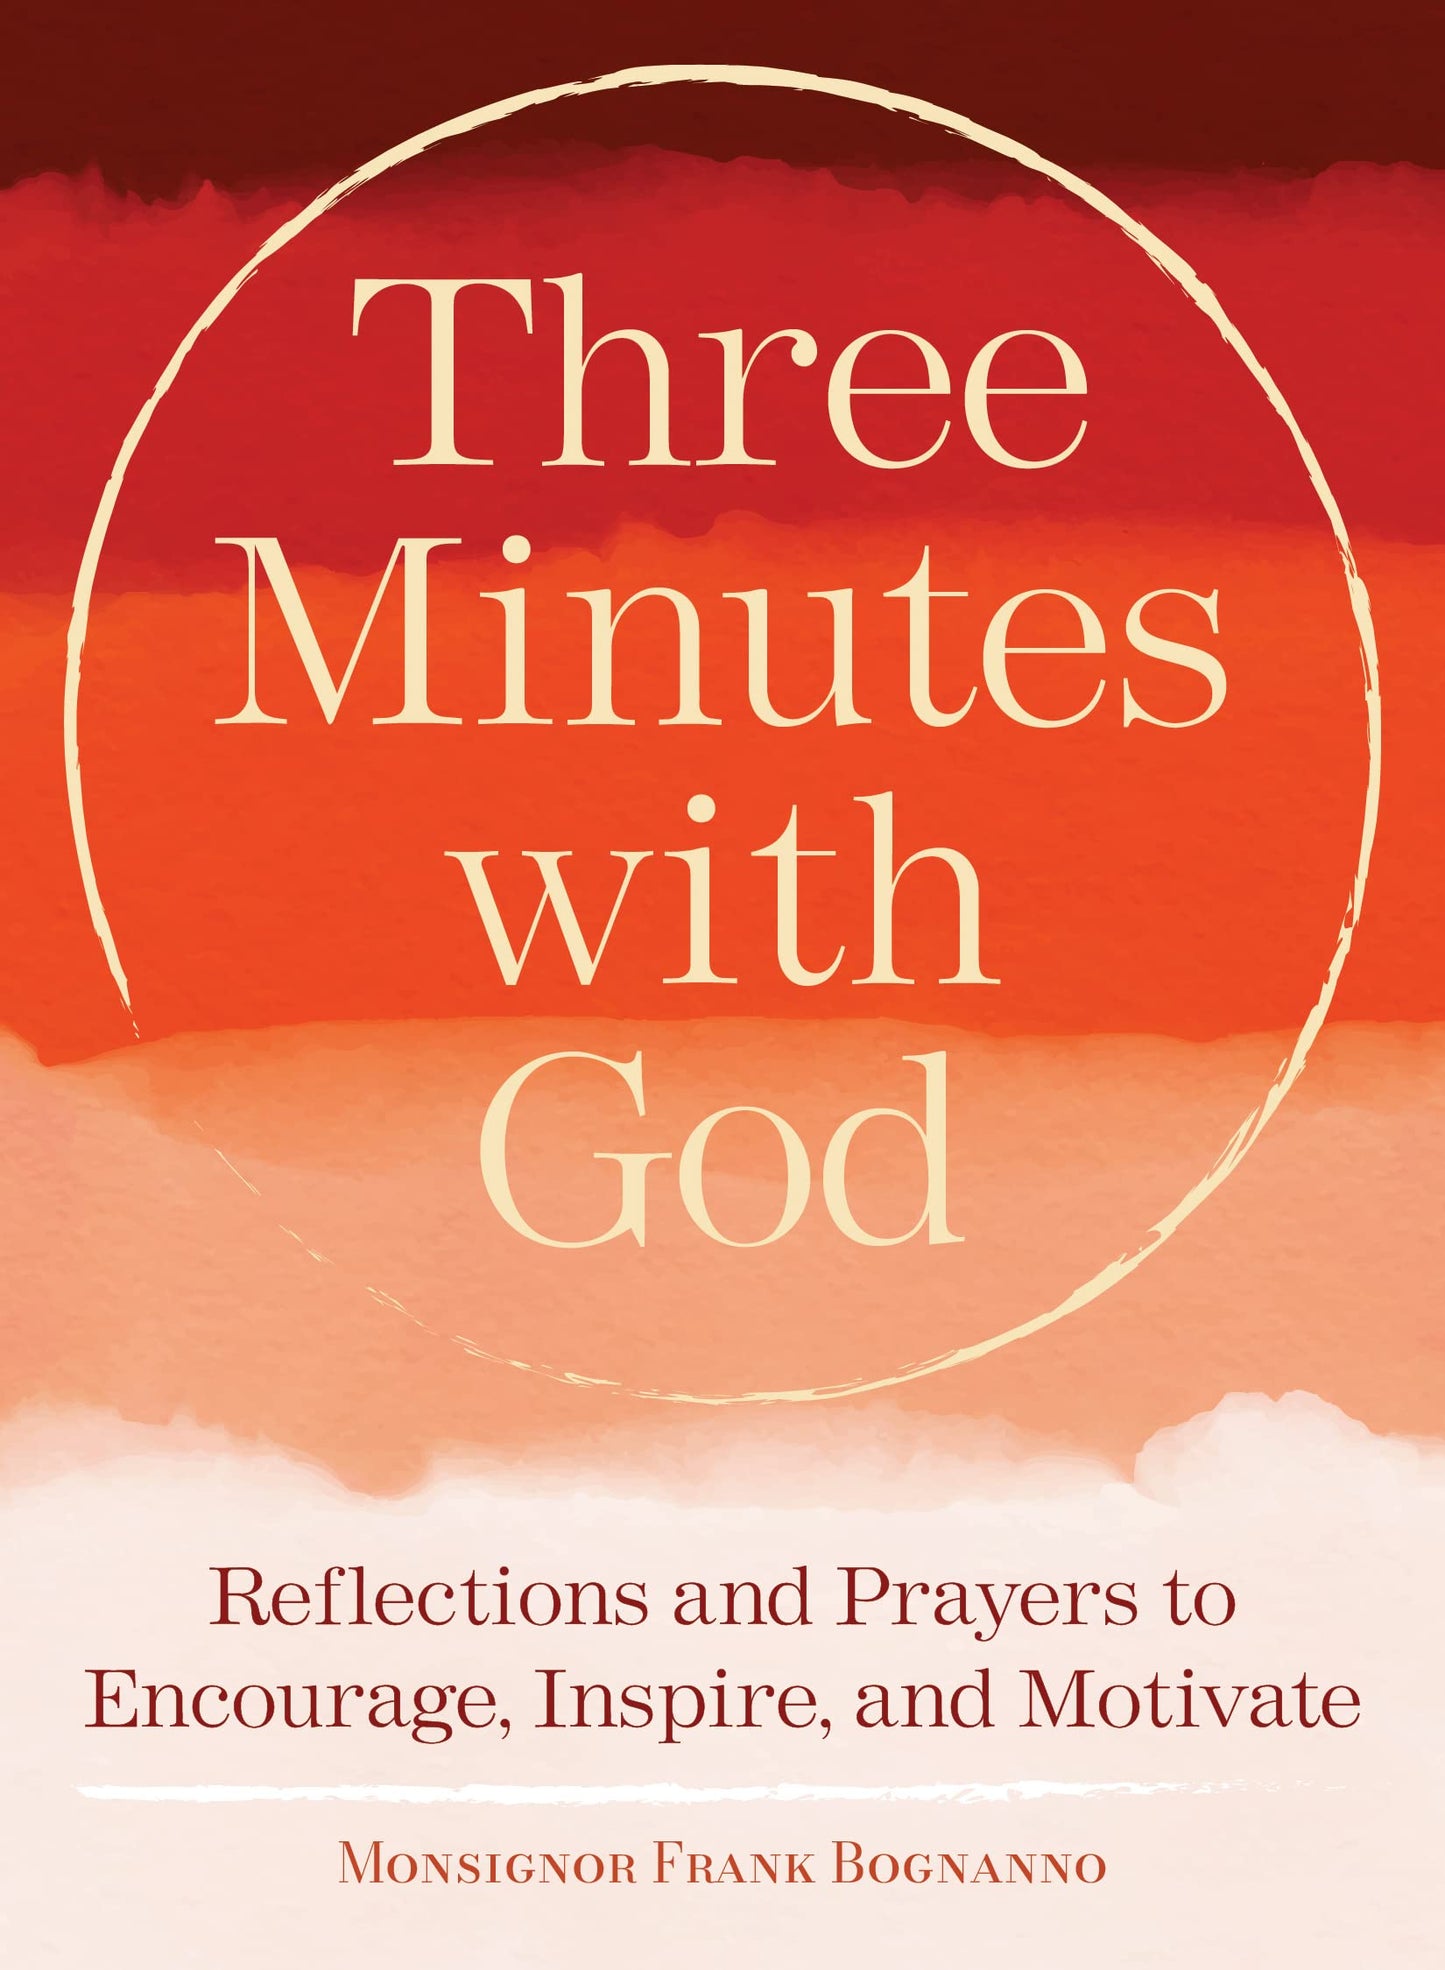 Three Minutes With God